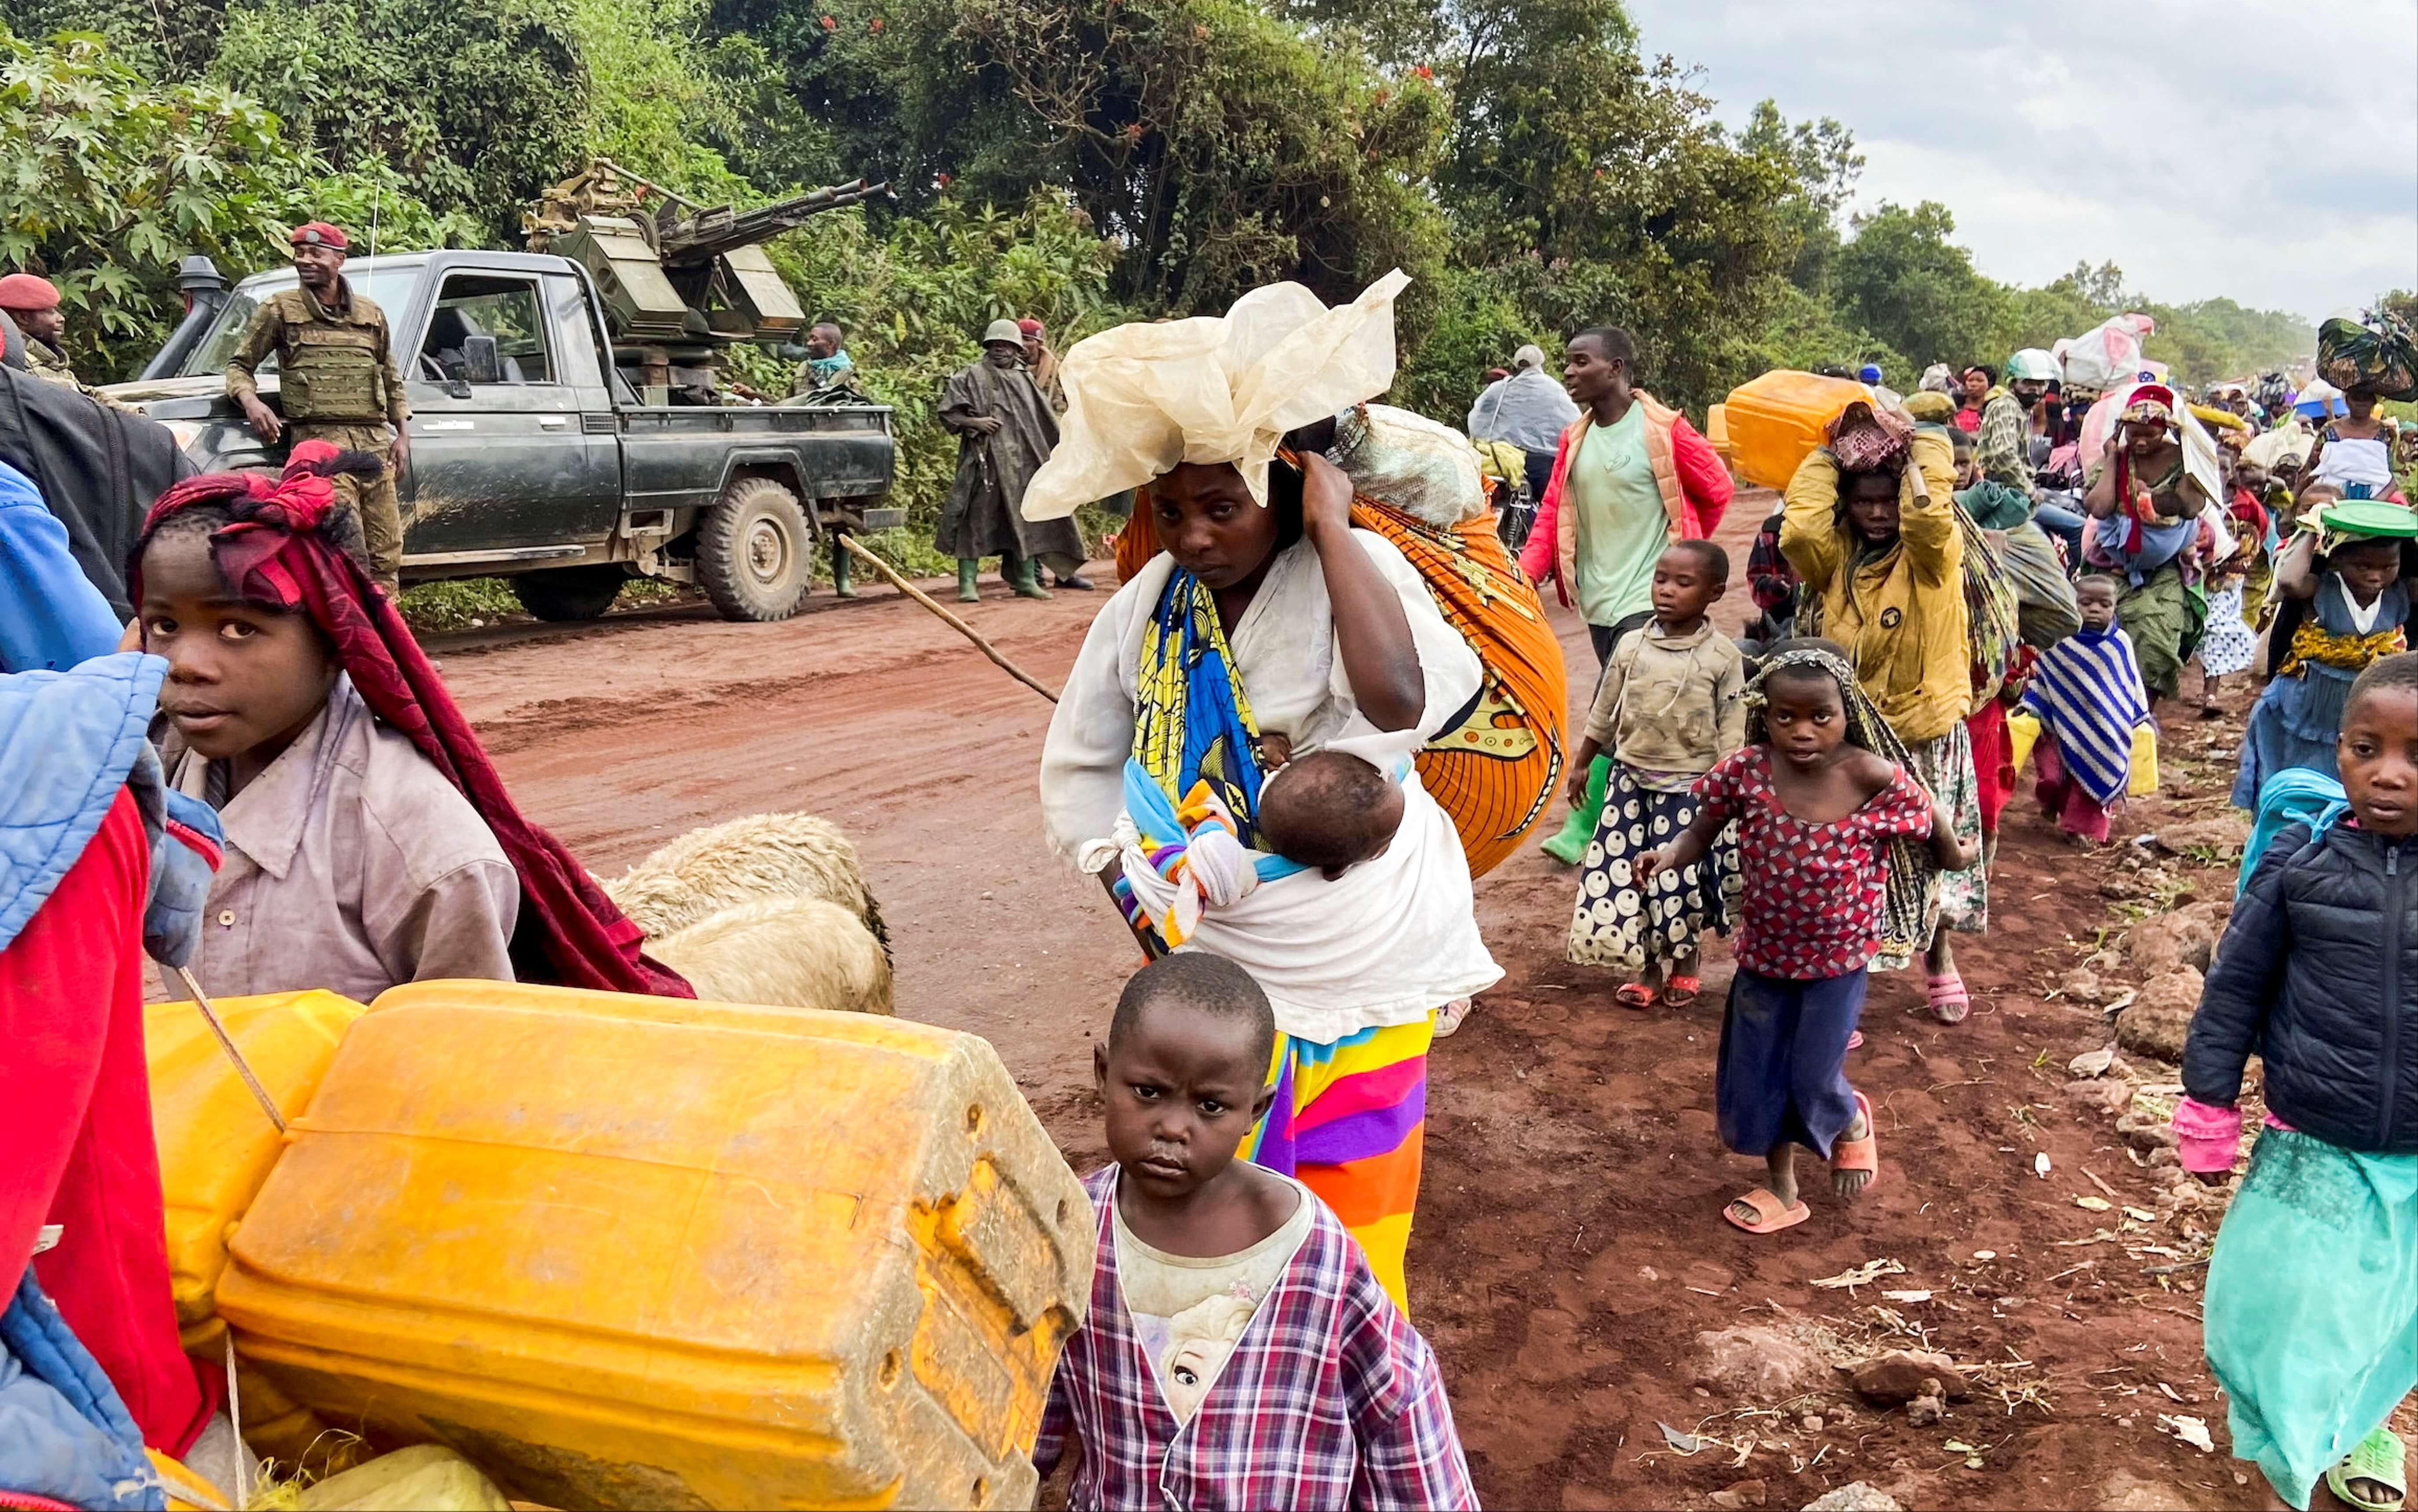 Congolese civilians carry their belongings as they flee near the Congolese border with Rwanda after fightings broke out in Kibumba, outside Goma in the North Kivu province of the Democratic Republic of Congo May 24, 2022